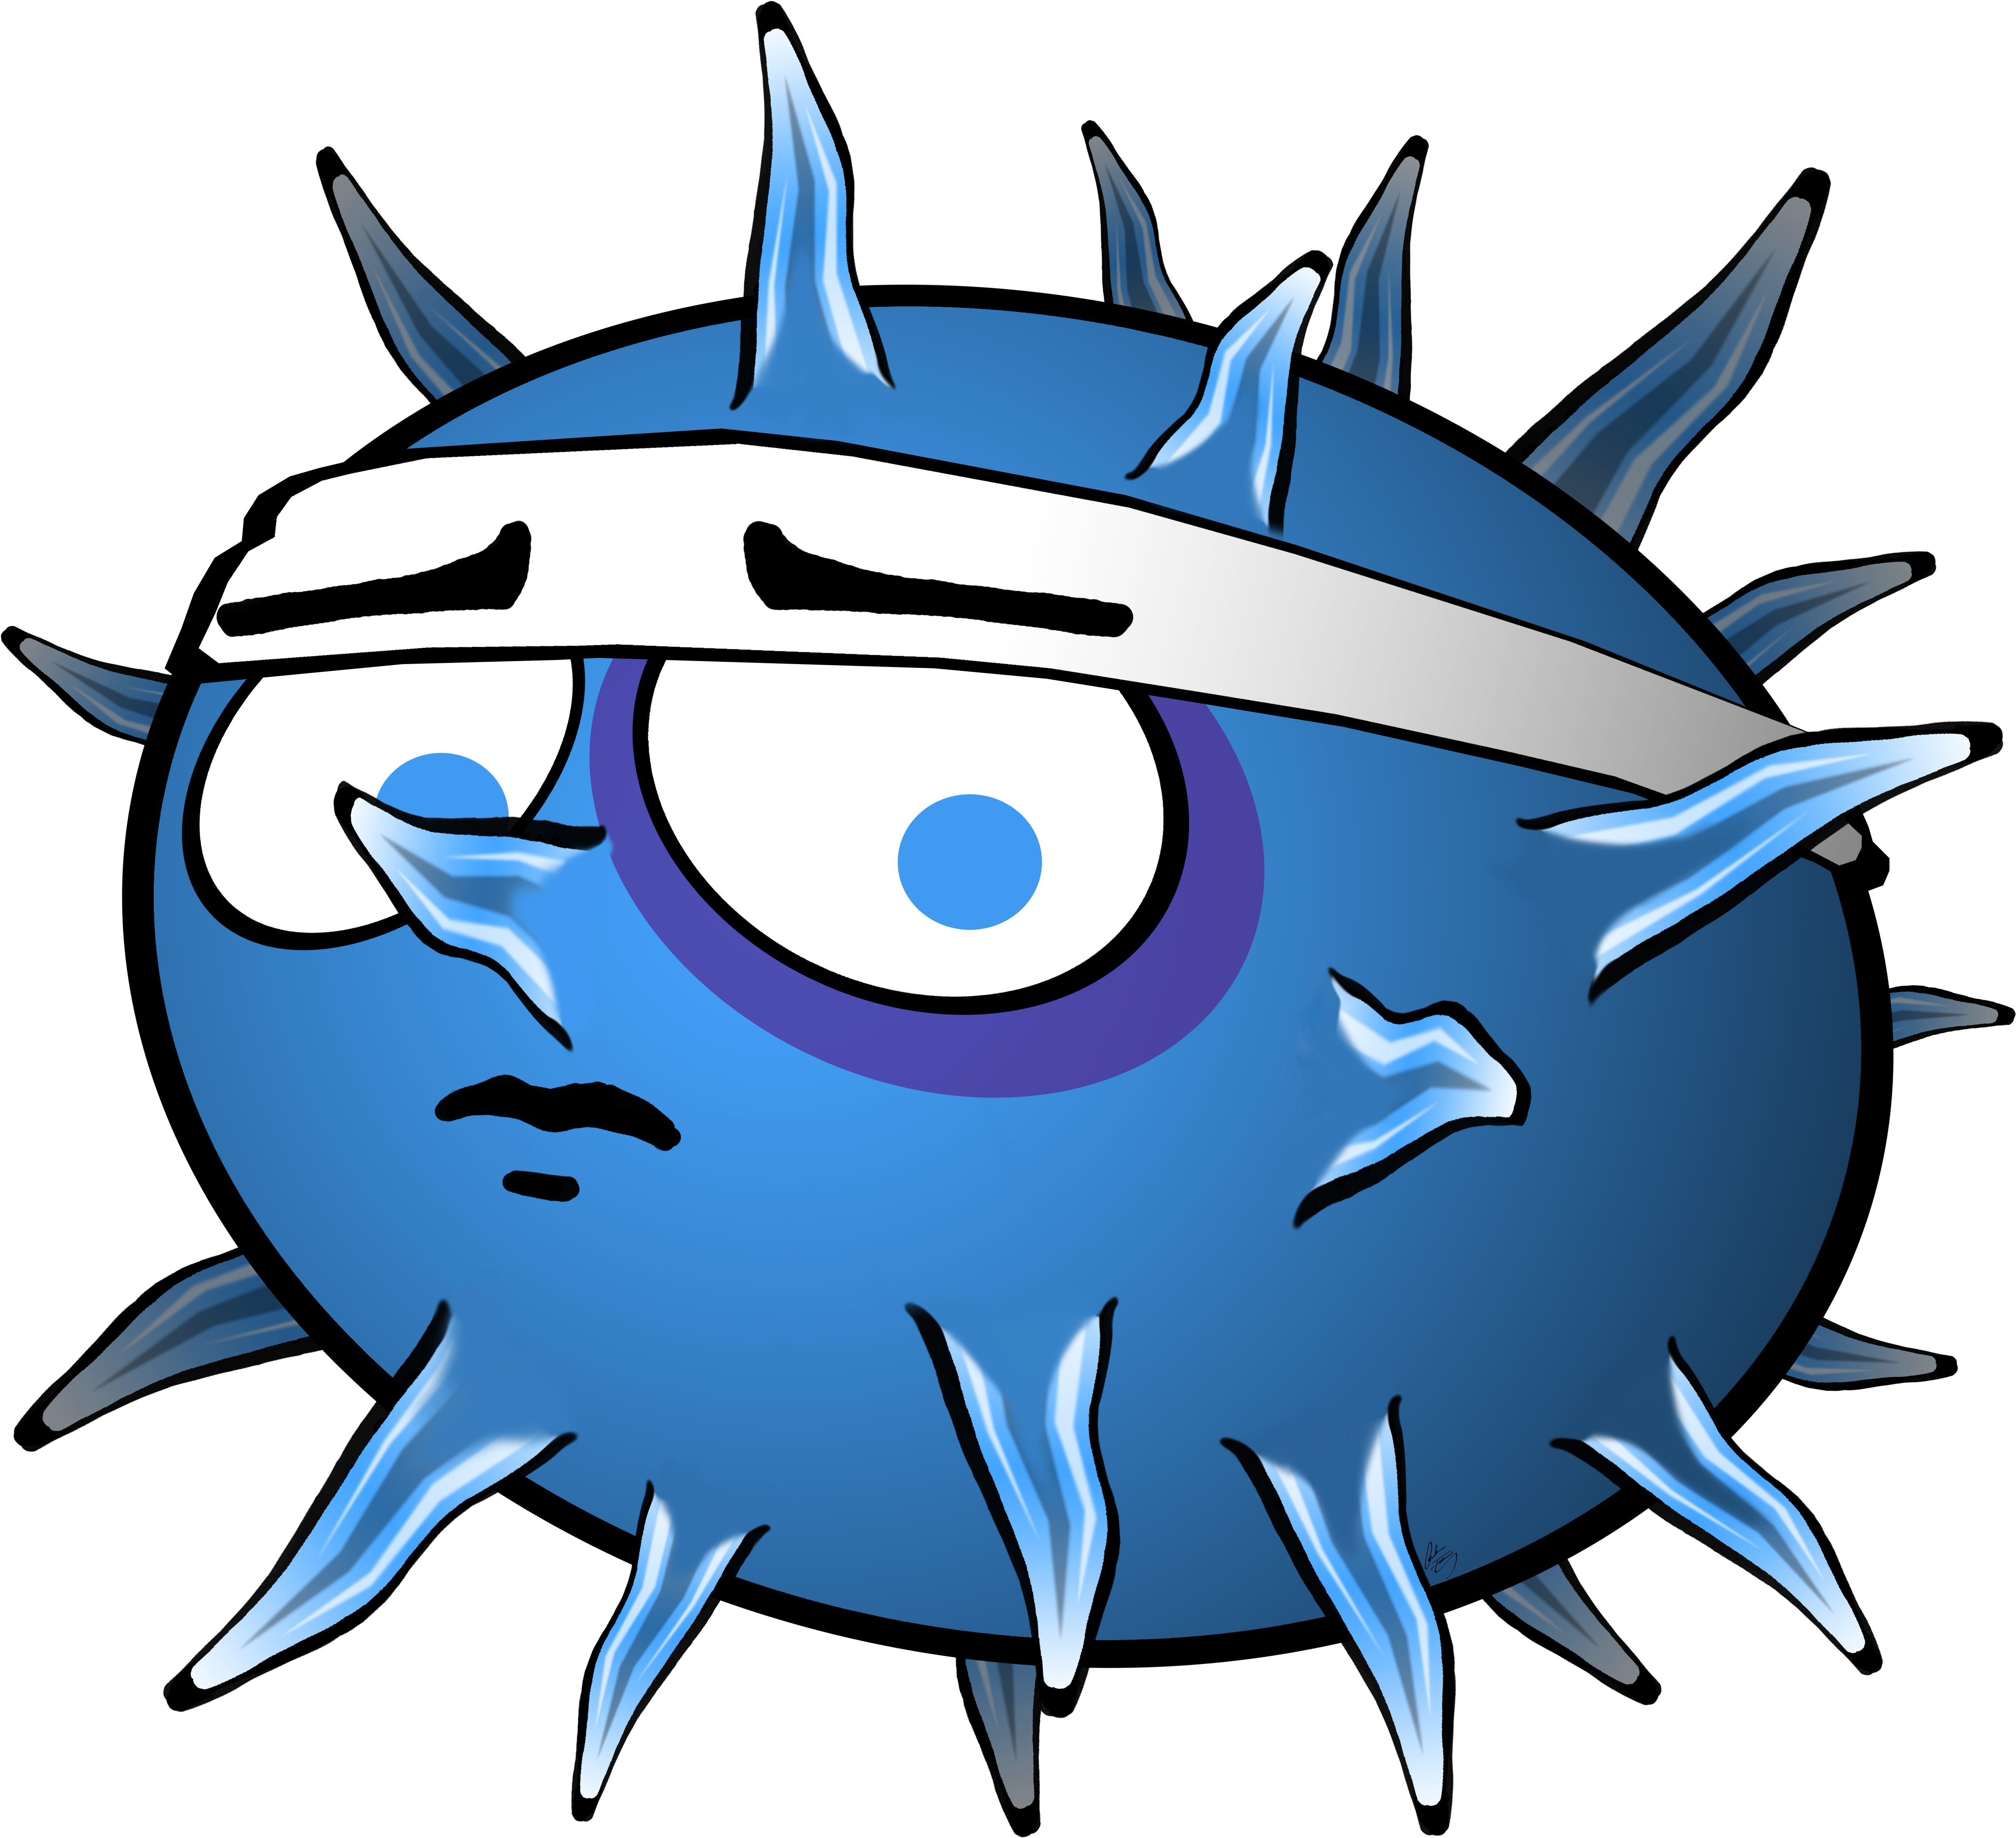 Rocky Test Icicle Vector By F0st3rart Rocky Test Icicle - Rocky Test Icicle Vector By F0st3rart Rocky Test Icicle (6000x6000)